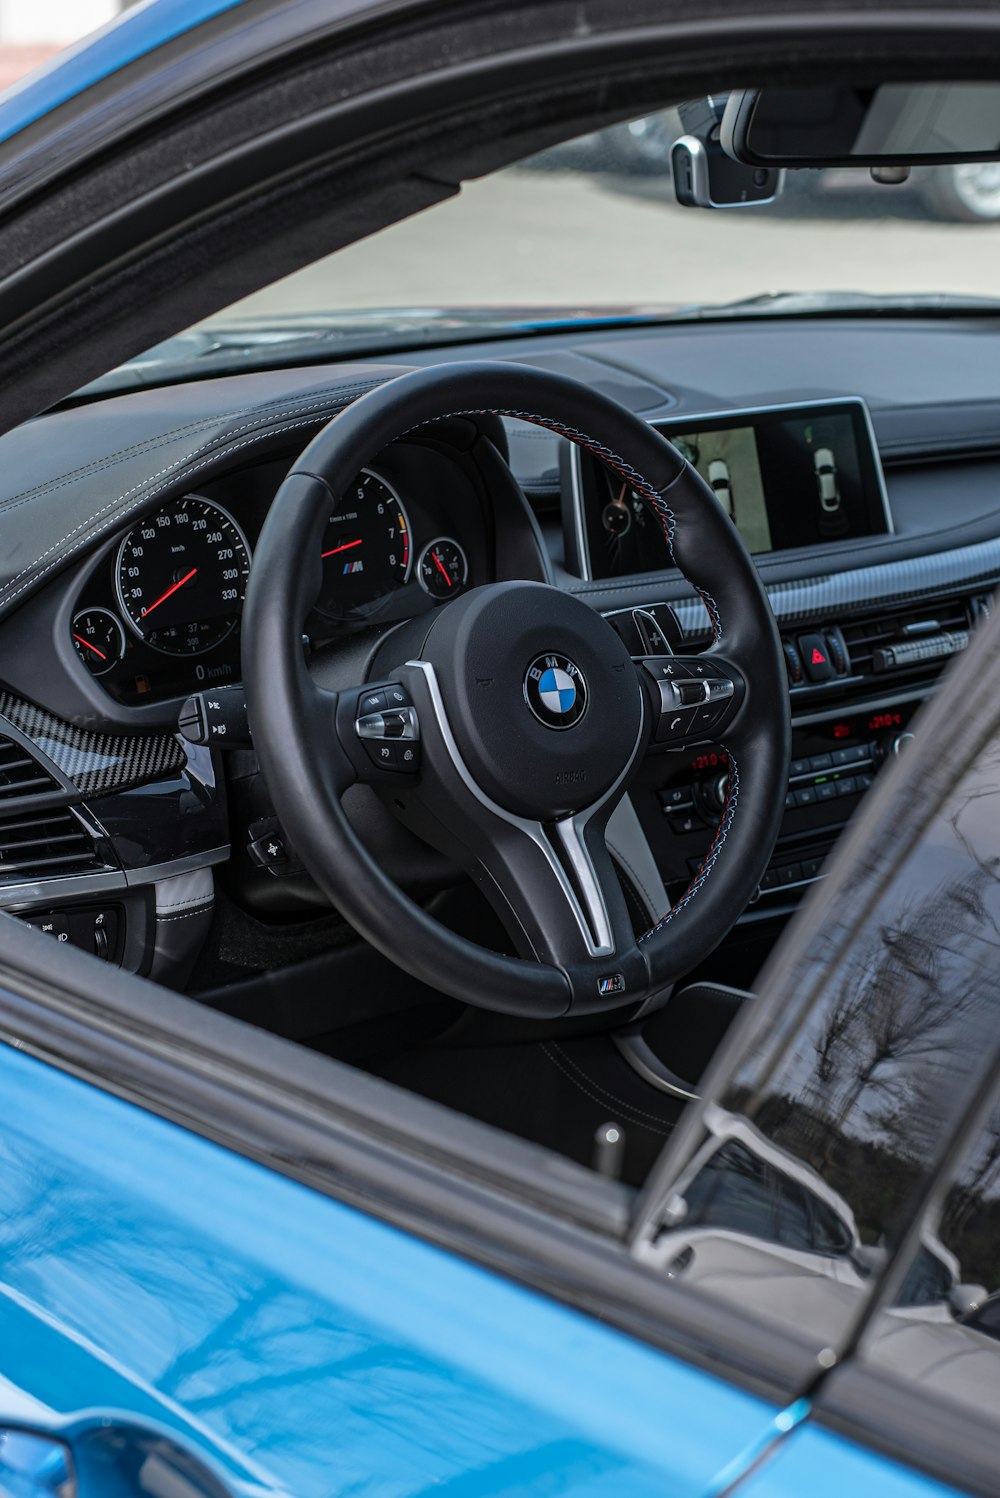 the interior of a blue car with a steering wheel